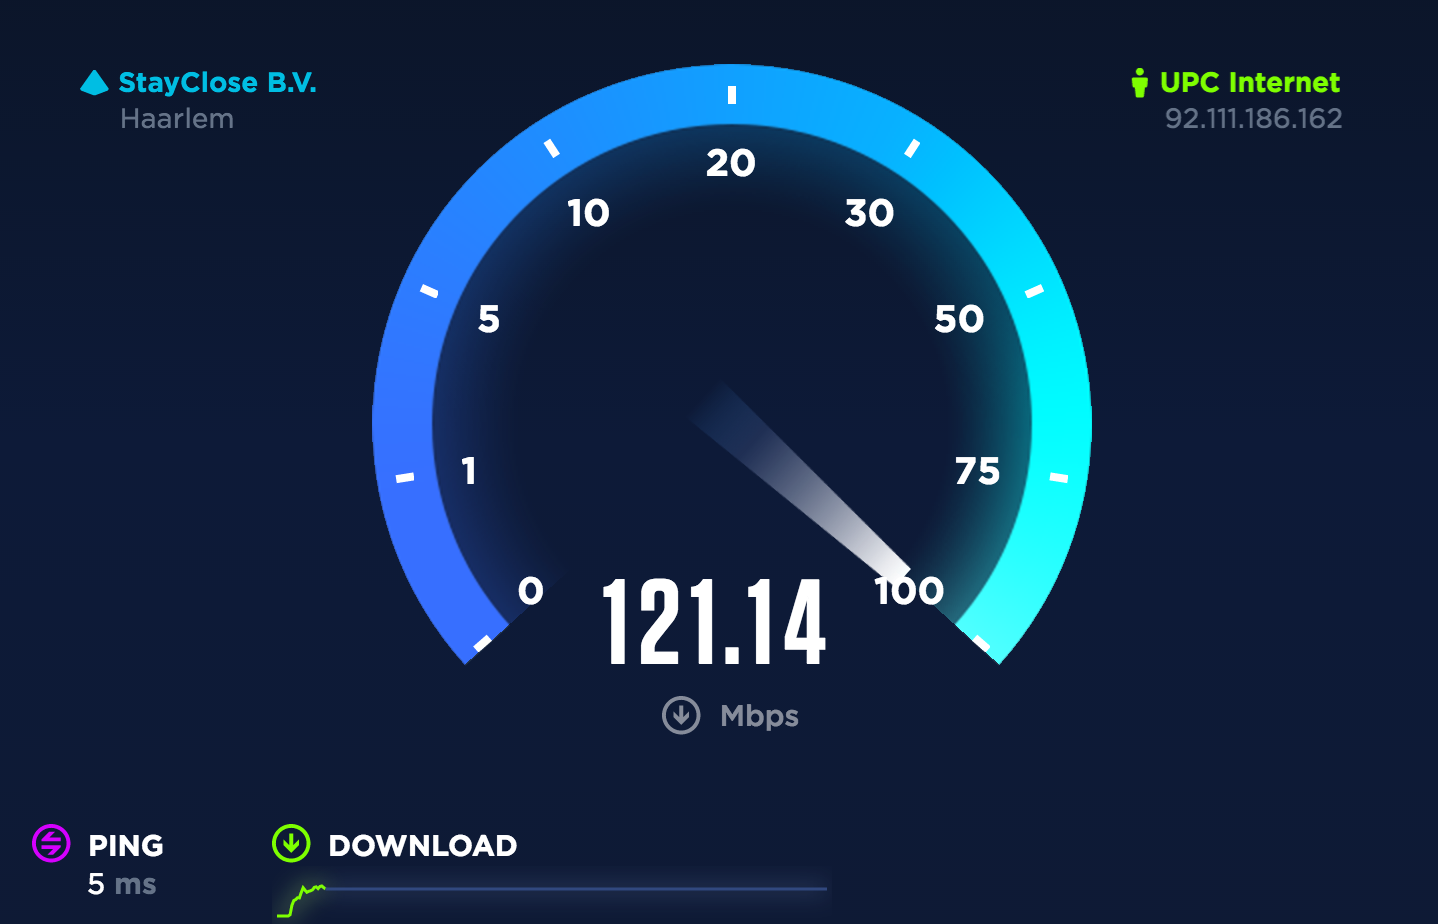 test the speed of your internet